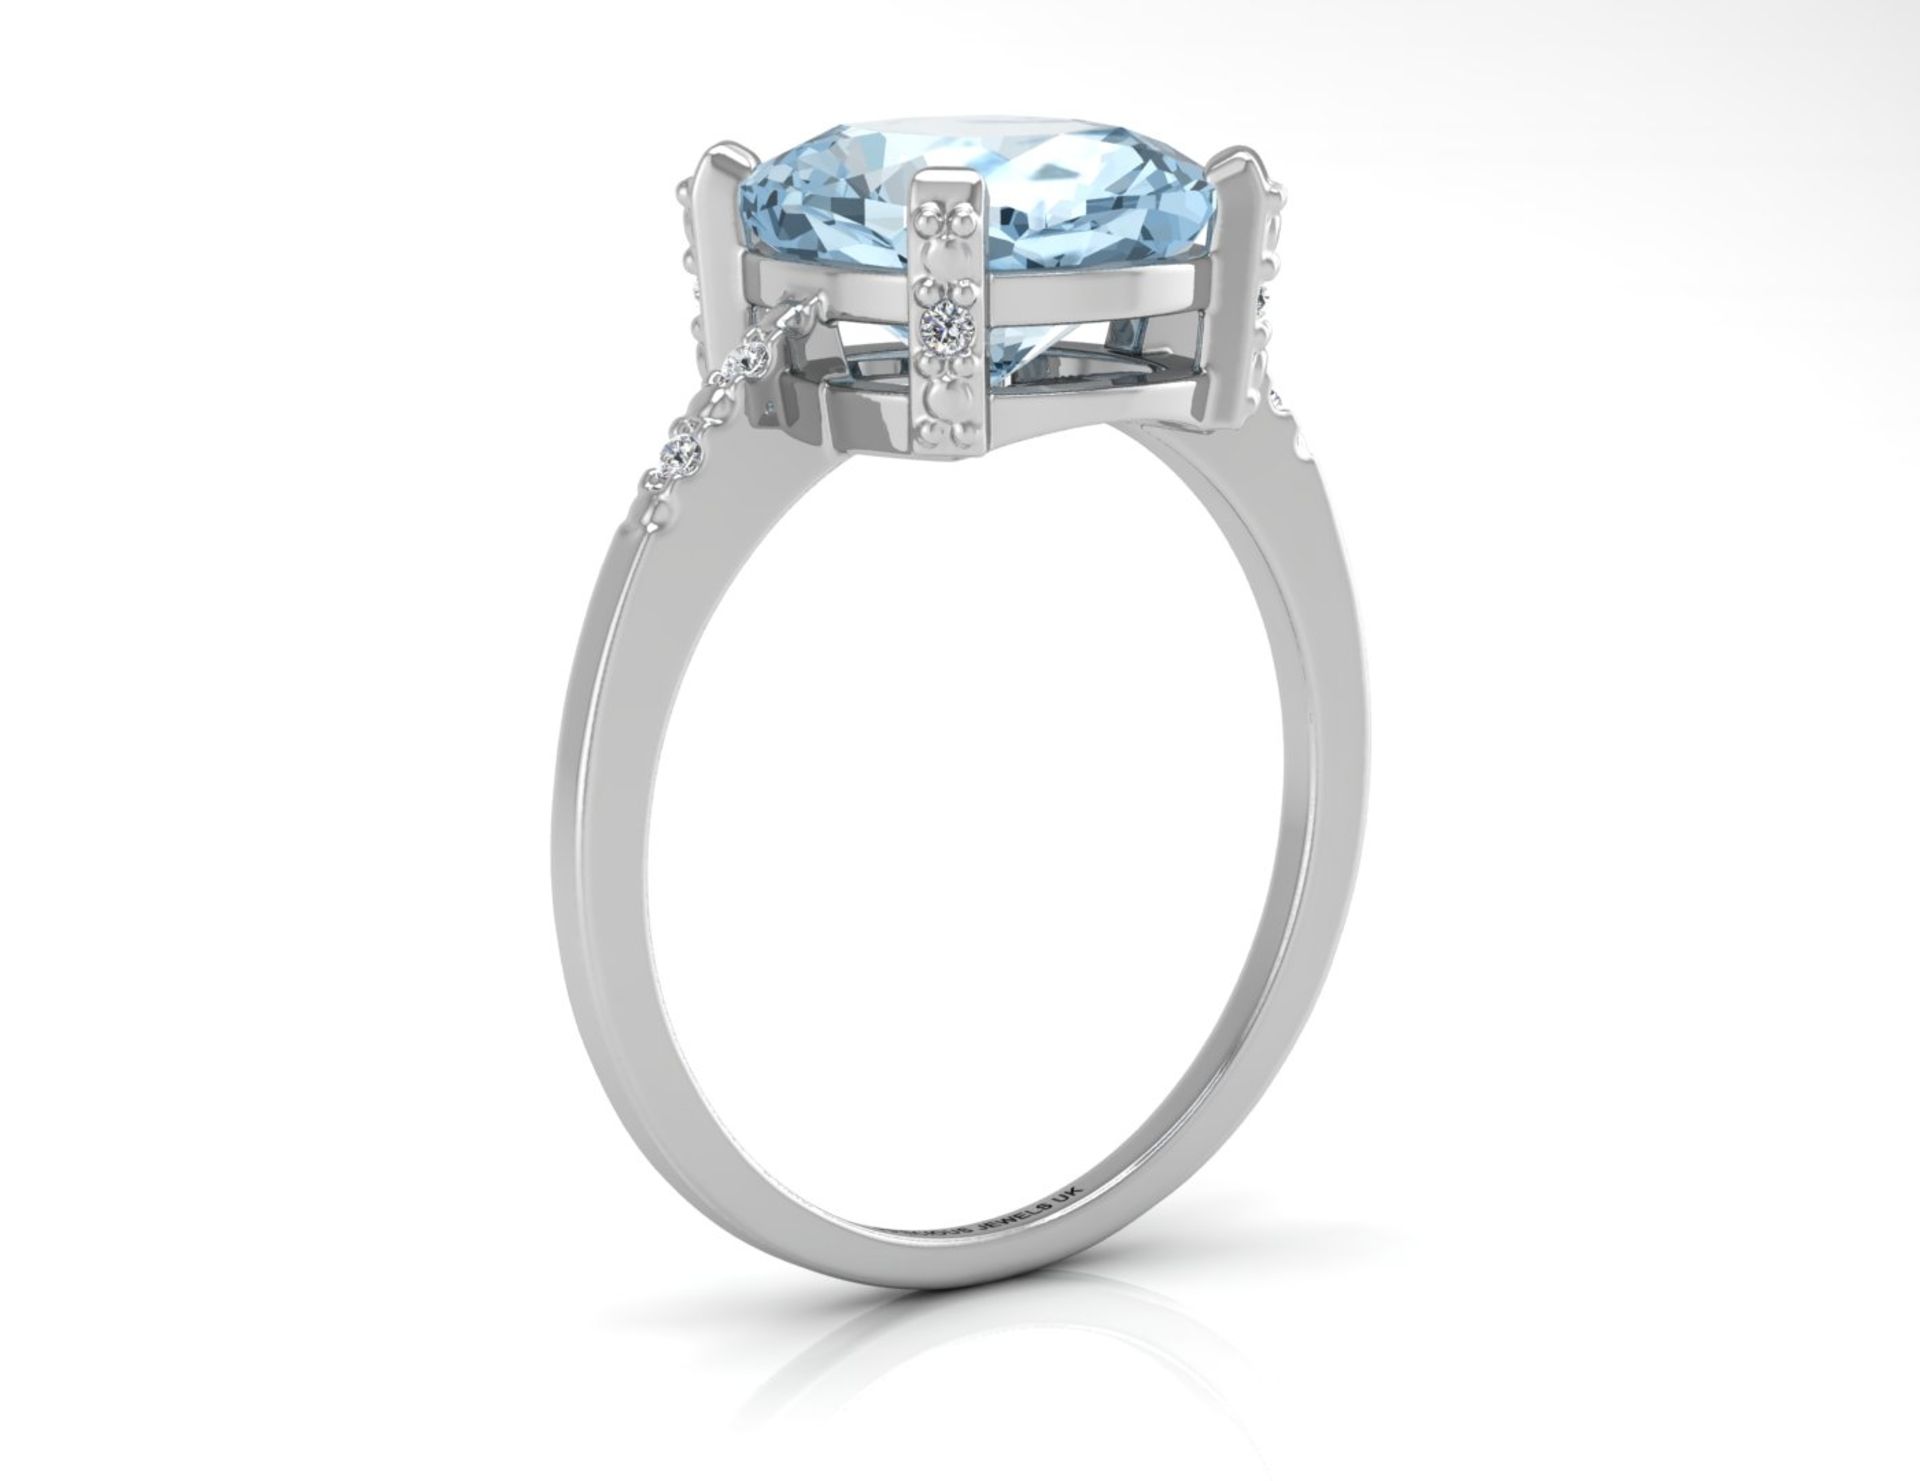 9ct White Gold Diamond And Blue Topaz Ring 0.04 Carats - Valued by GIE £1,620.00 - 9ct White Gold - Image 2 of 5